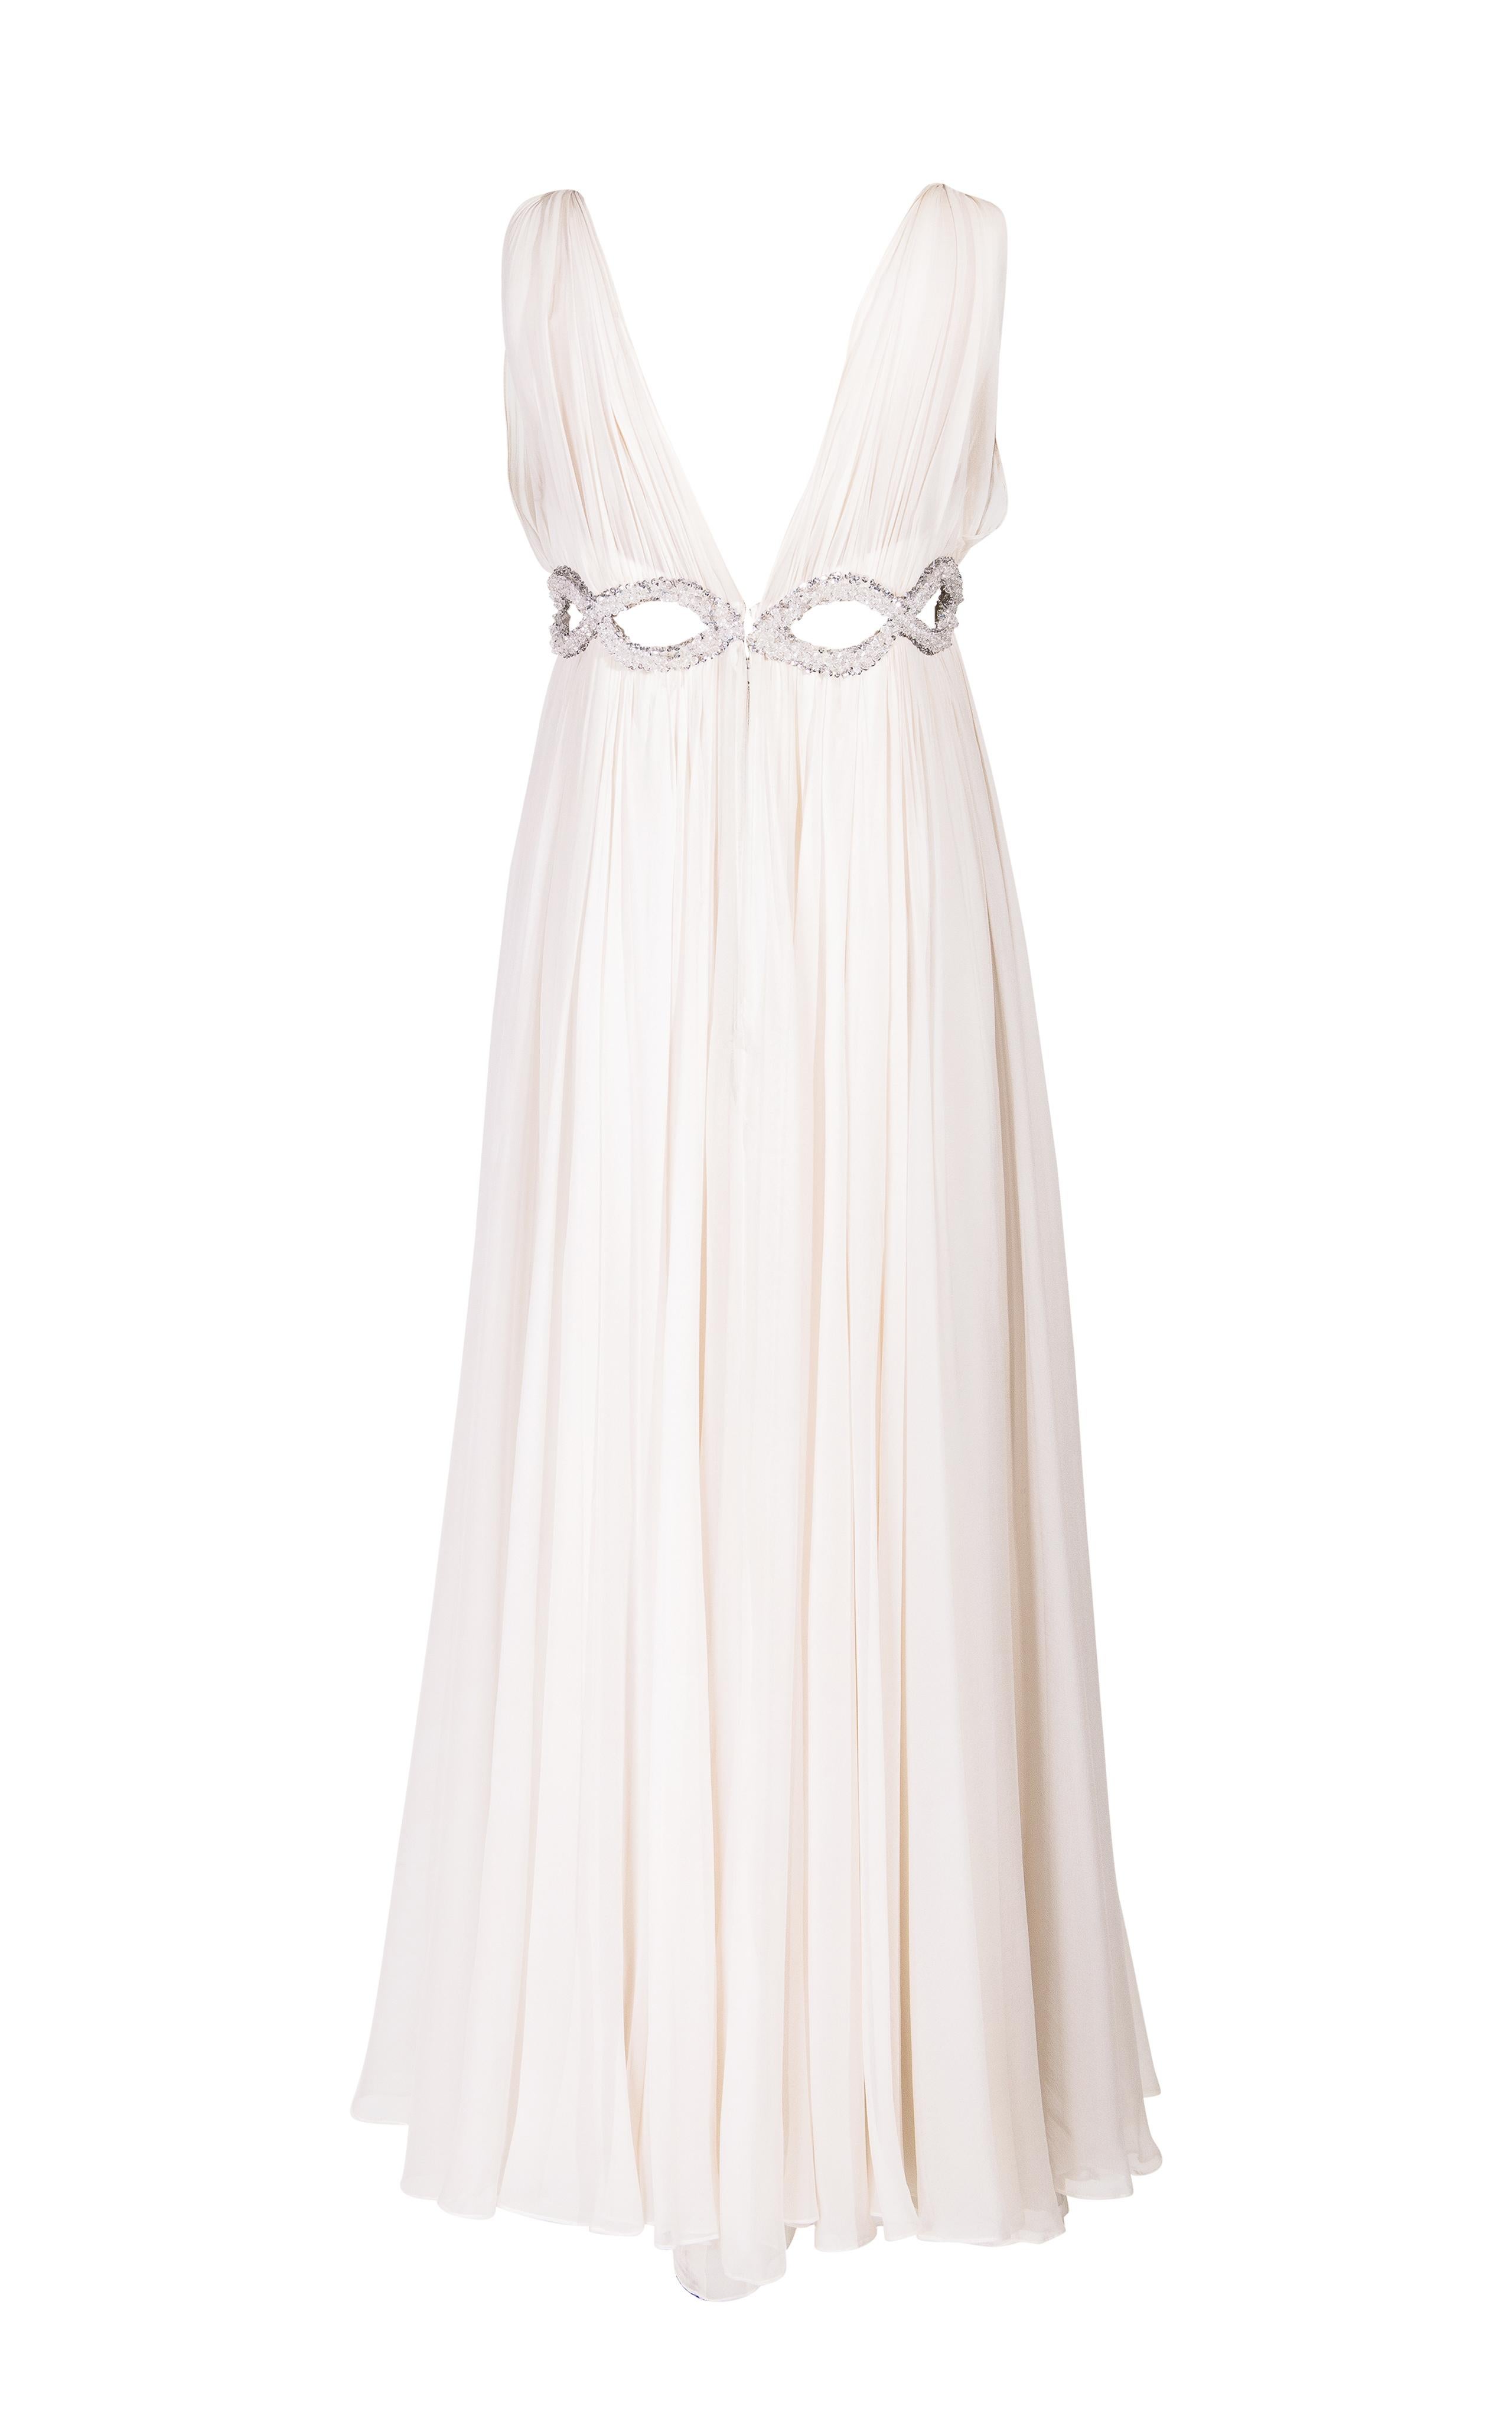 1968 Malcolm Starr Off-White Pleated Gown with Crystal Cutout Waist In Good Condition For Sale In North Hollywood, CA